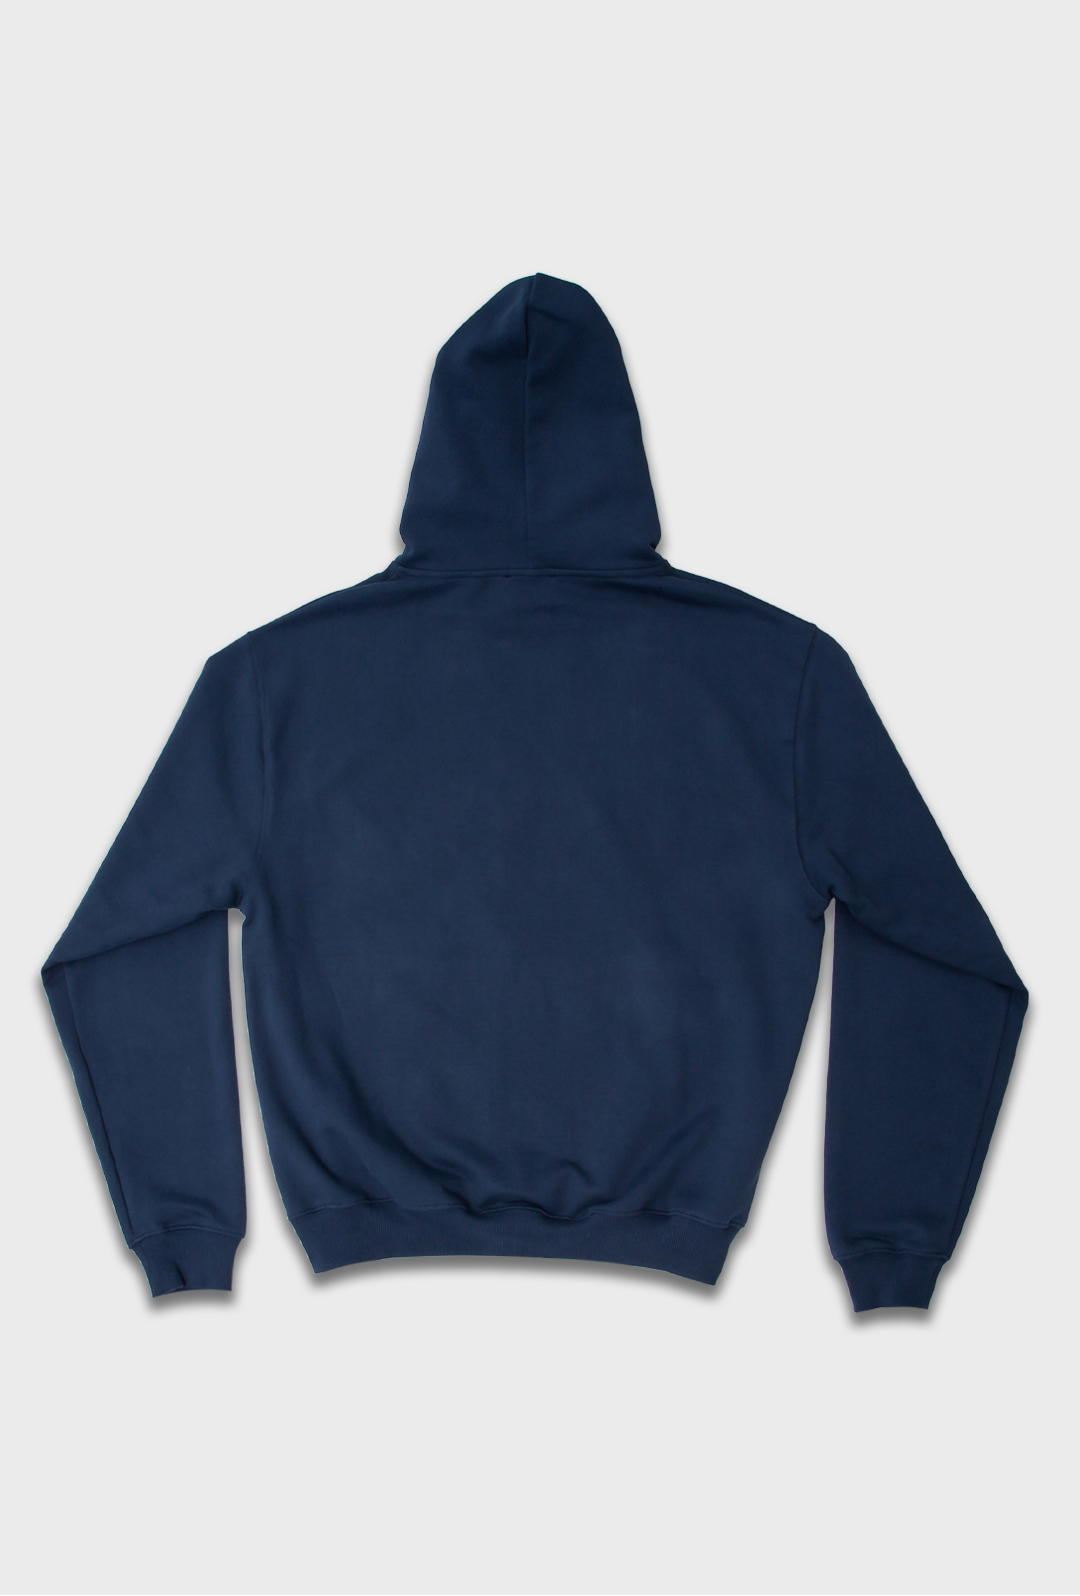 rollr clothing oversized hoodie made organic cotton in dusk blue